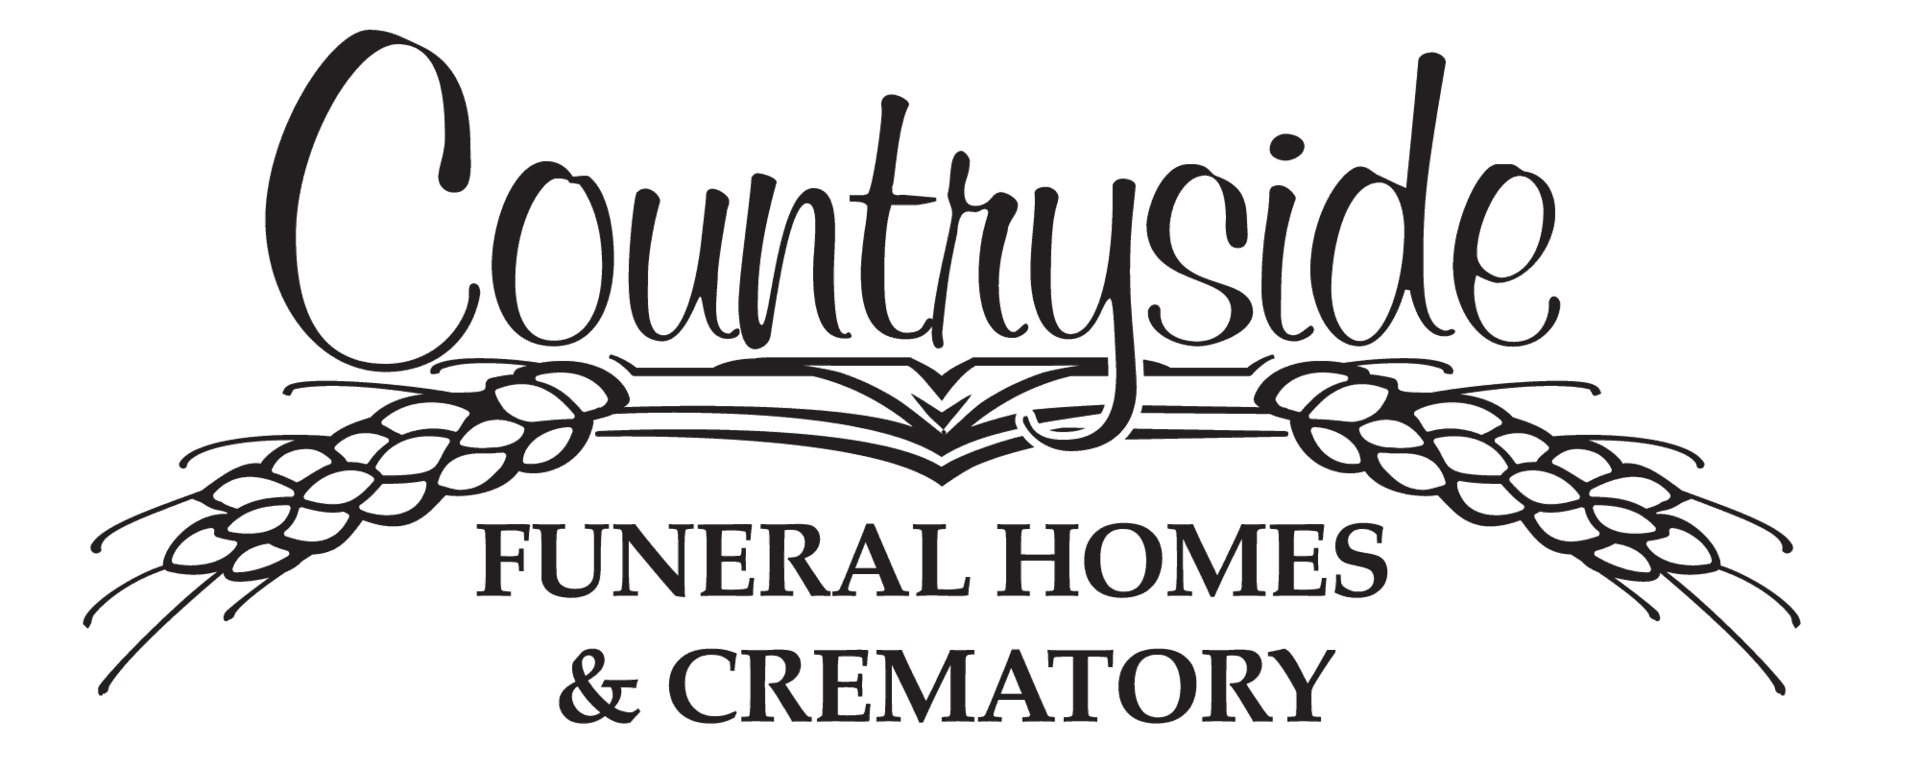 Countryside Funeral Home & Crematory